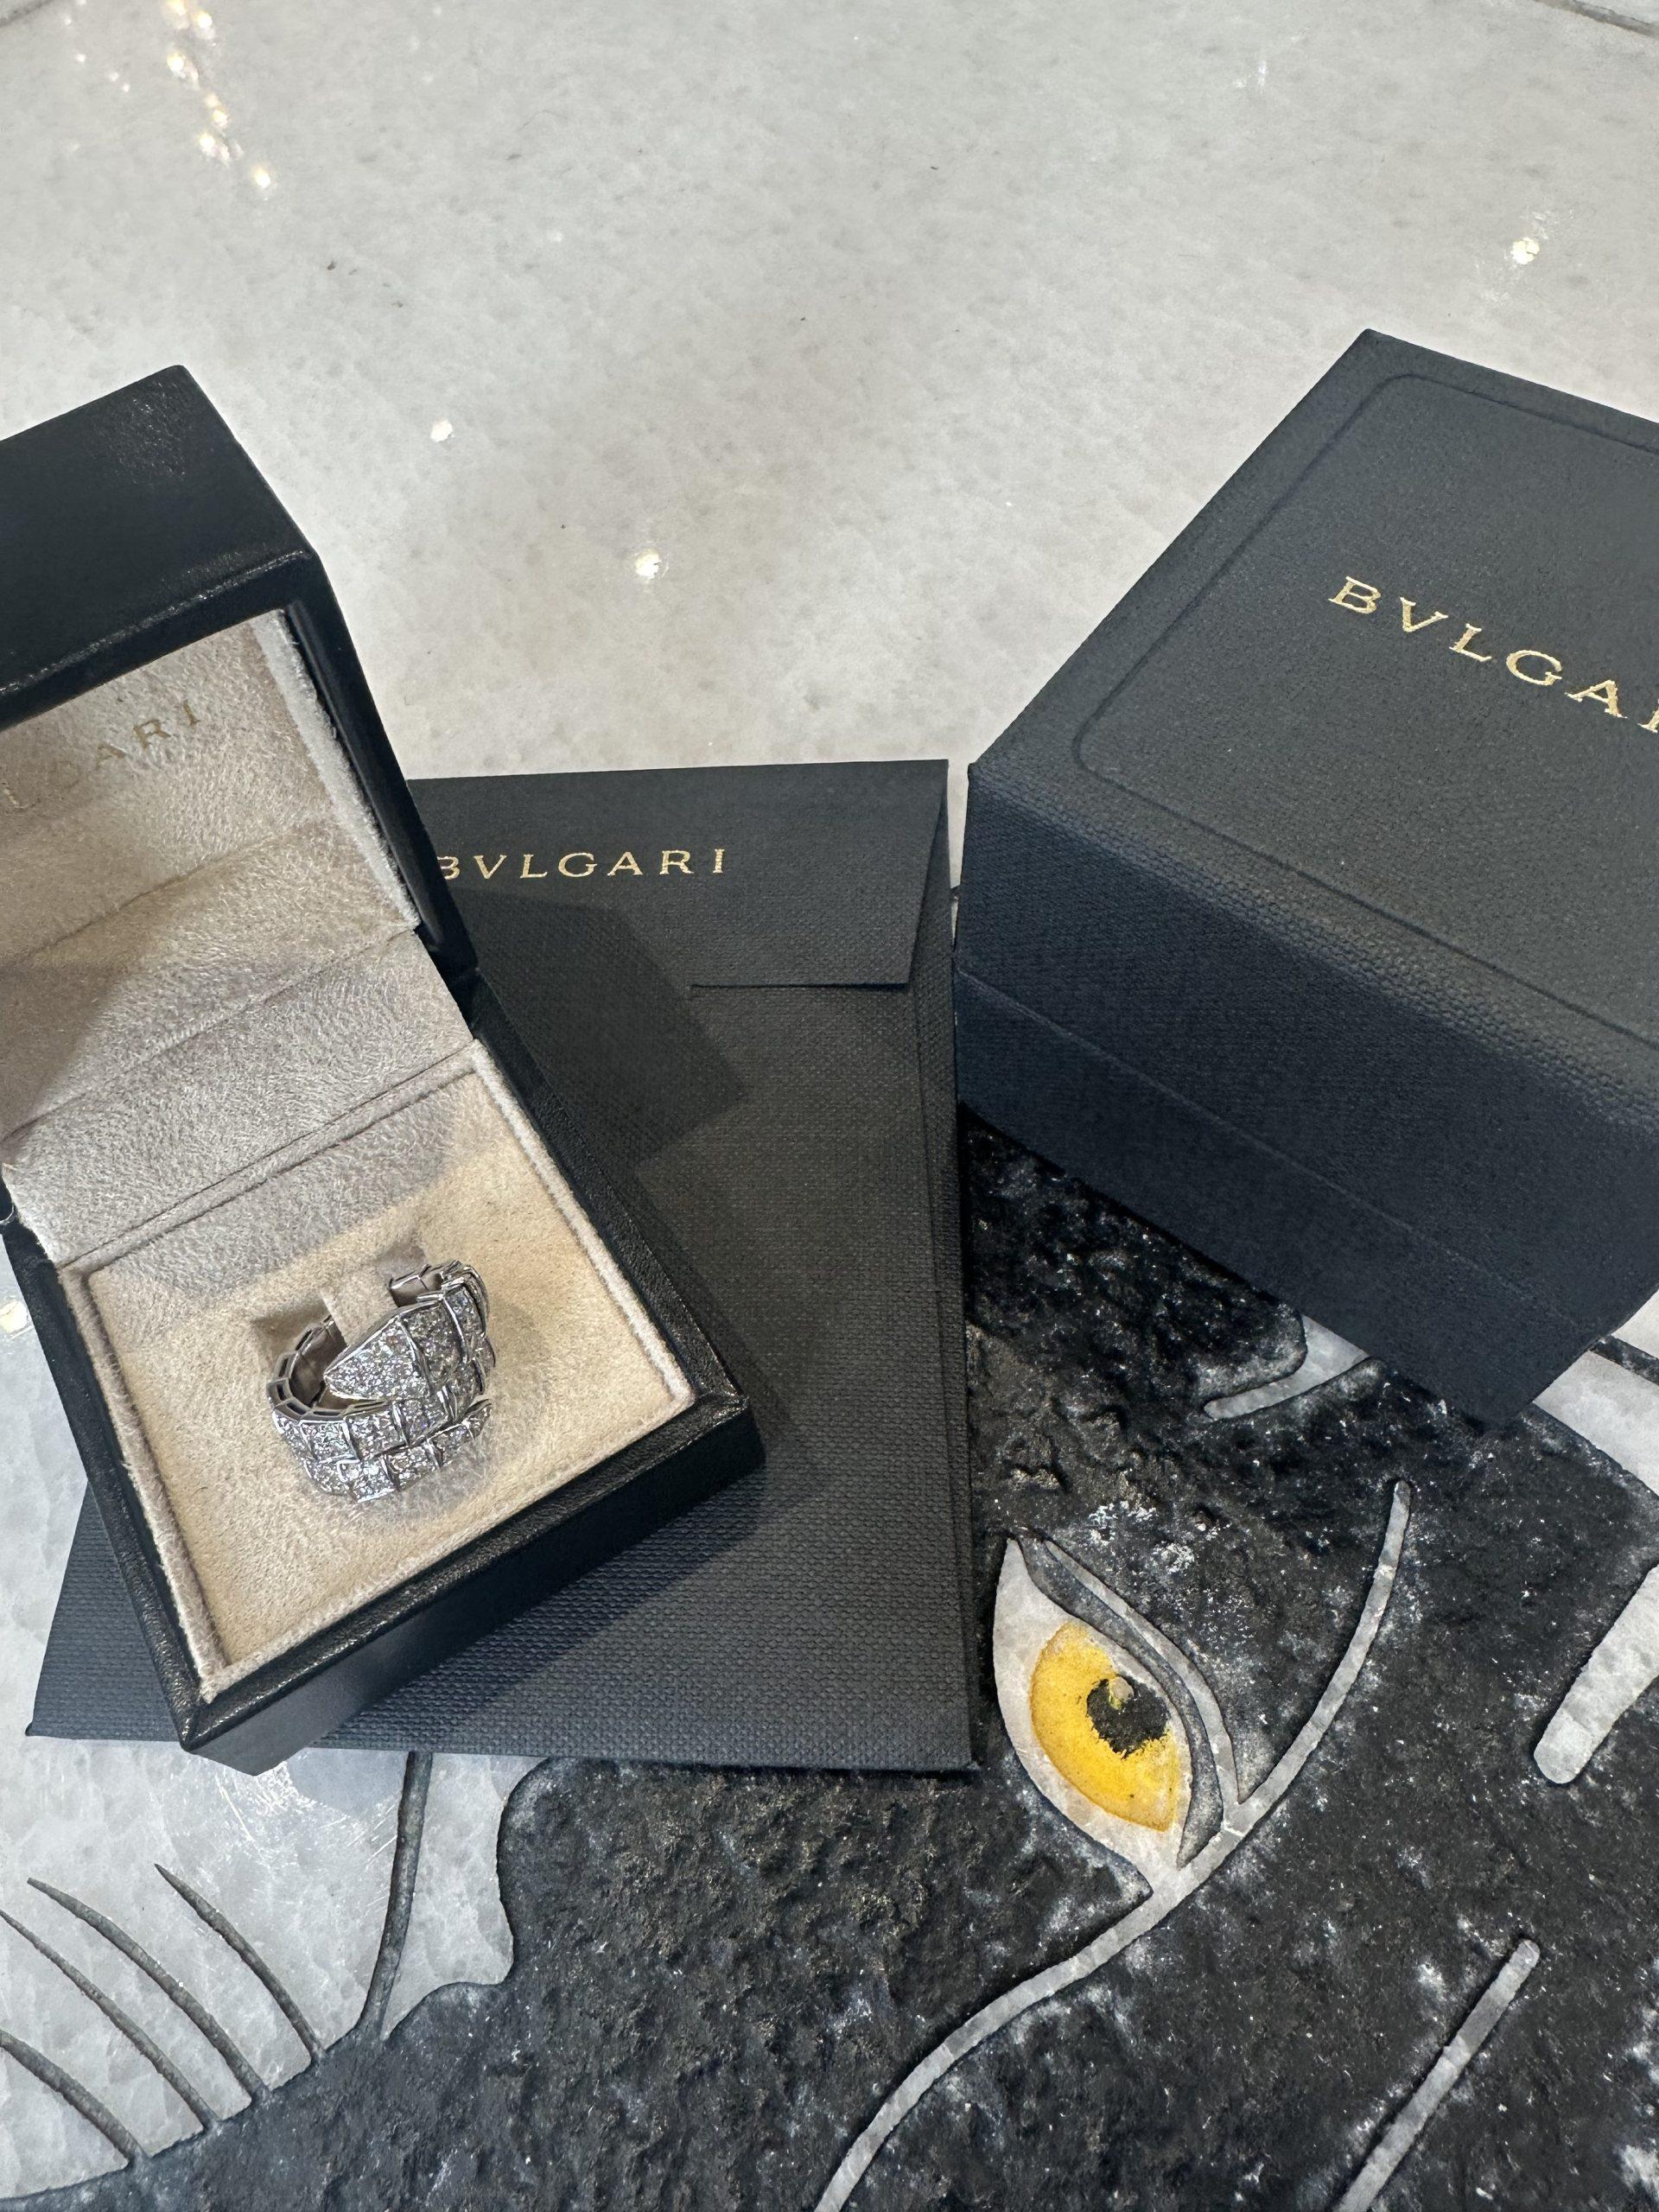 Brand: Bvlgari

Collection: Viper Serpenti

Style: Double Wrap Ring

Size: M (flexible) (5.25 - 6.5)

Material: 18k White Gold

Stones: Diamonds

Total Carat Weight: approx. 2.8 ct.​​​​​​​

Includes: Brilliance Jewels 2 Year Warranty

              